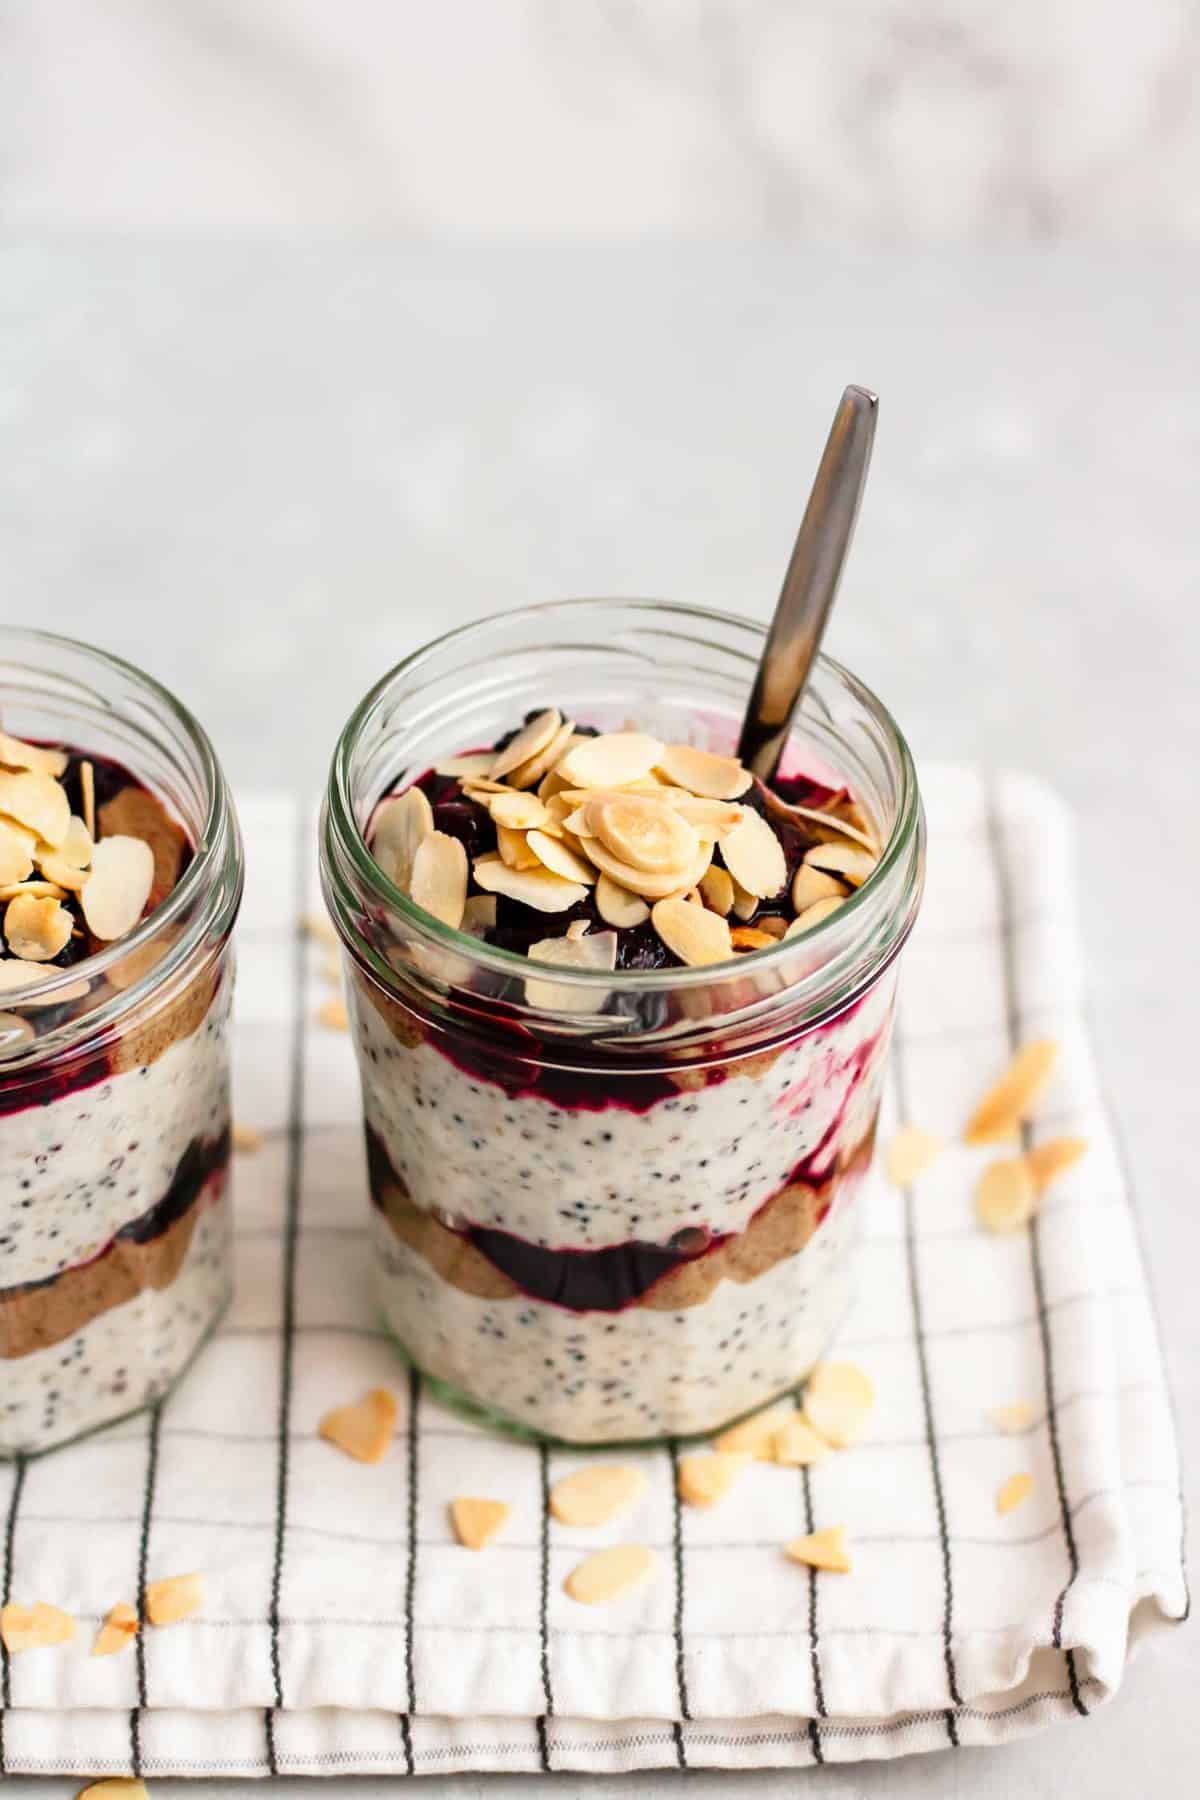 breakfast parfait with flaked almonds on top with a spoon.